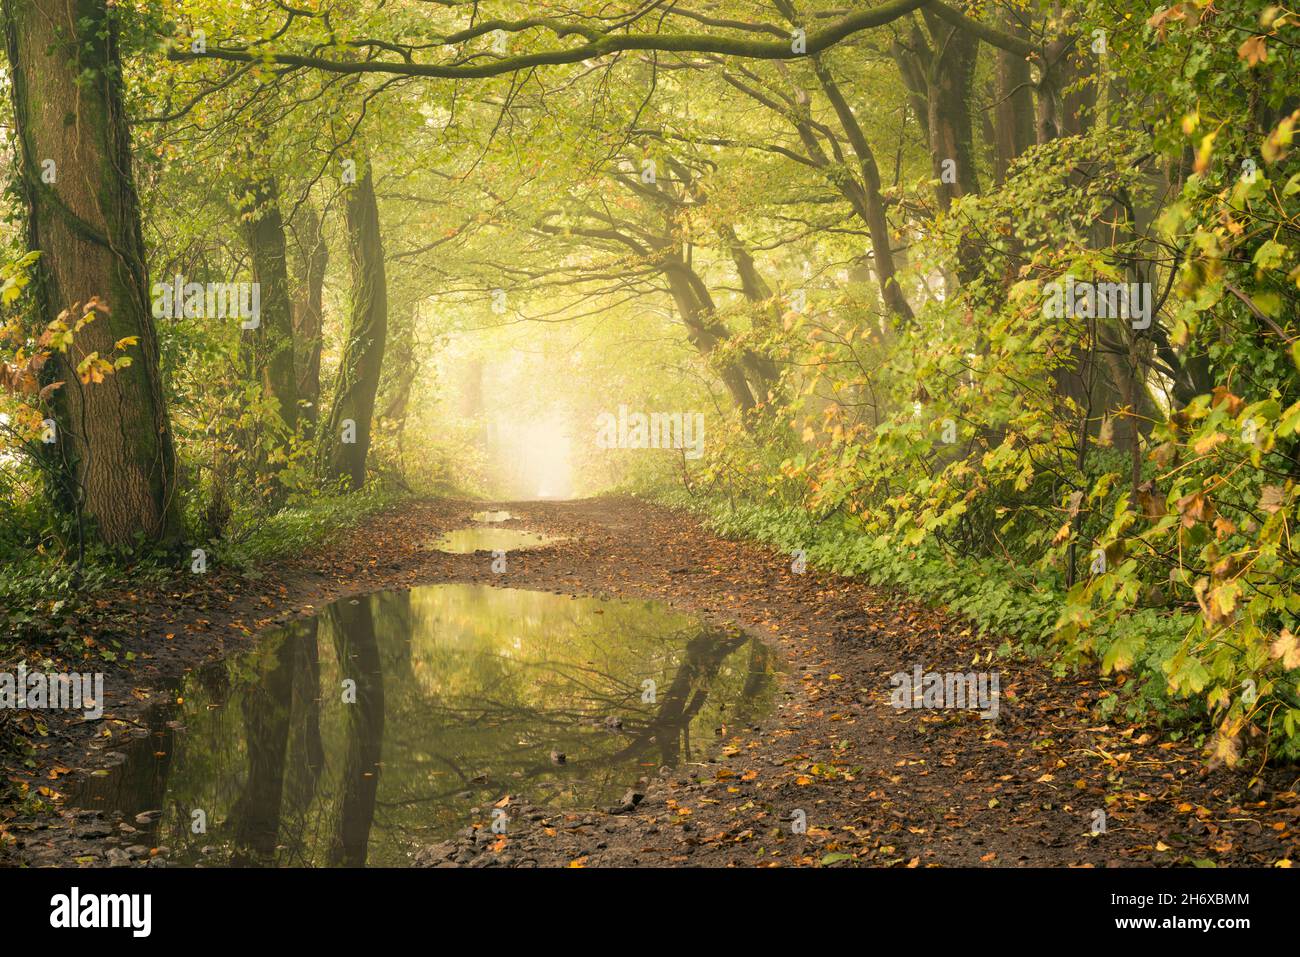 A pathway through a misty woodland in early autumn in the Mendip Hills near Priddy, Somerset, England. Stock Photo